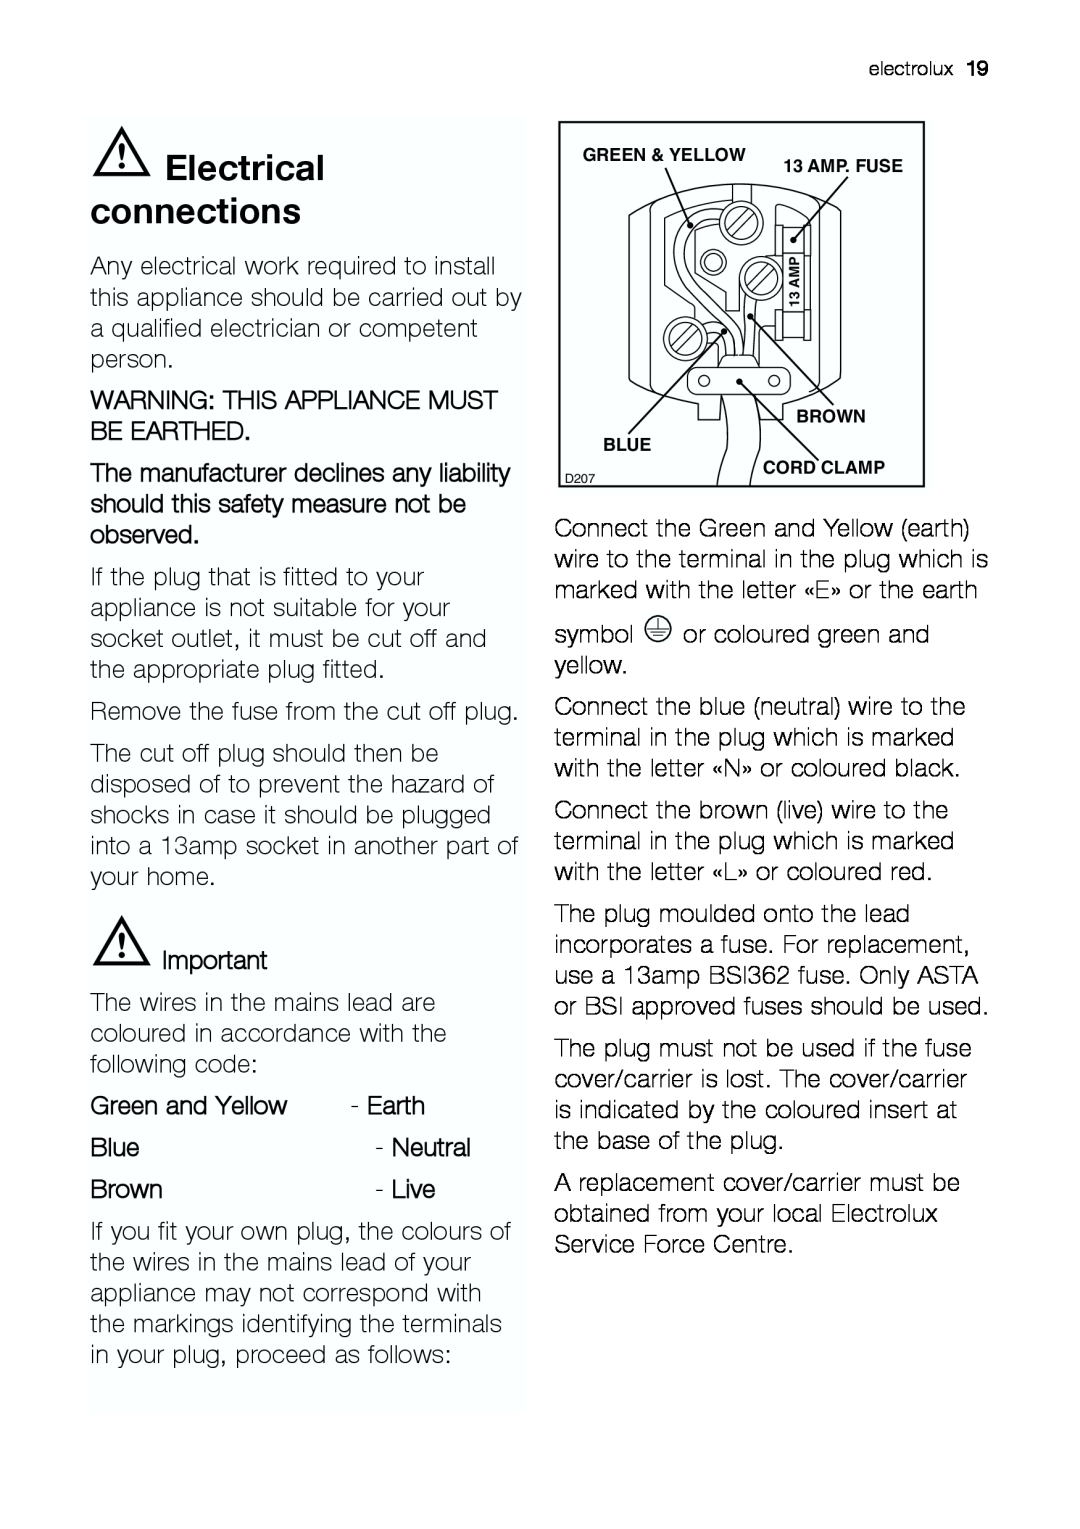 Electrolux EUF 27291 W manual Electrical connections, Warning This Appliance Must Be Earthed, Green and Yellow 